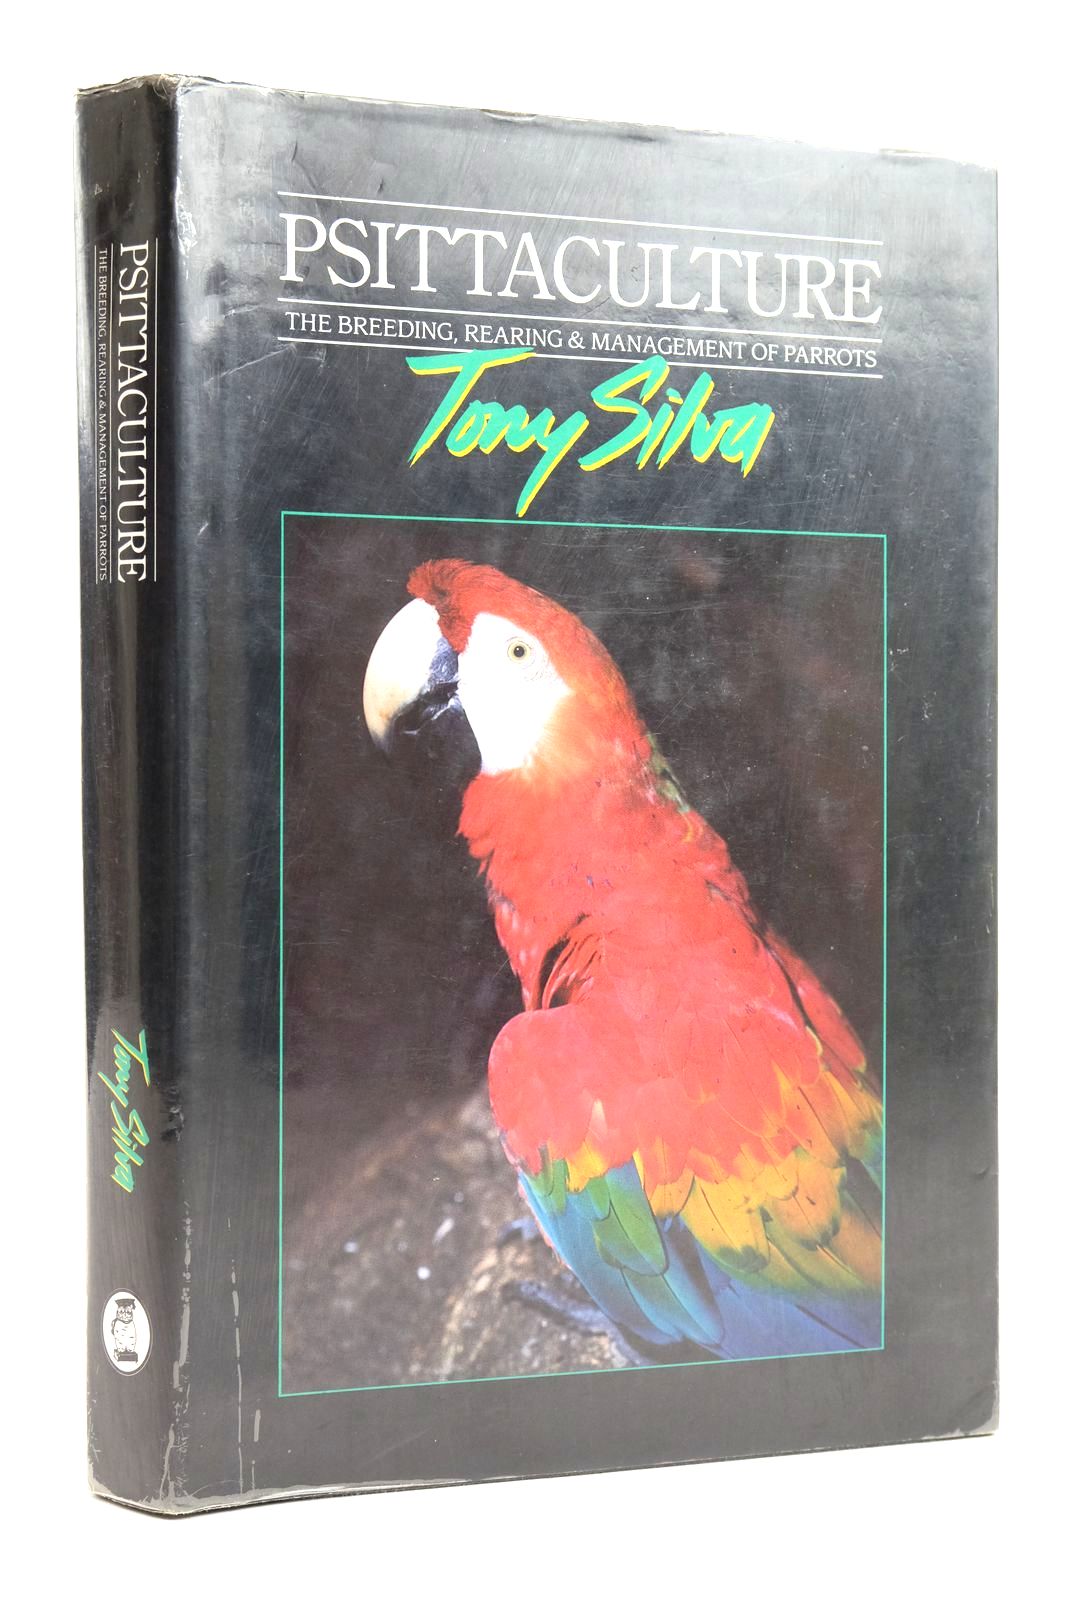 Photo of PSITTACULTURE: BREEDING, REARING AND MANAGEMENT OF PARROTS written by Silva, Tony published by Birdworld, Silvio Mattacchione & Co (STOCK CODE: 2135407)  for sale by Stella & Rose's Books